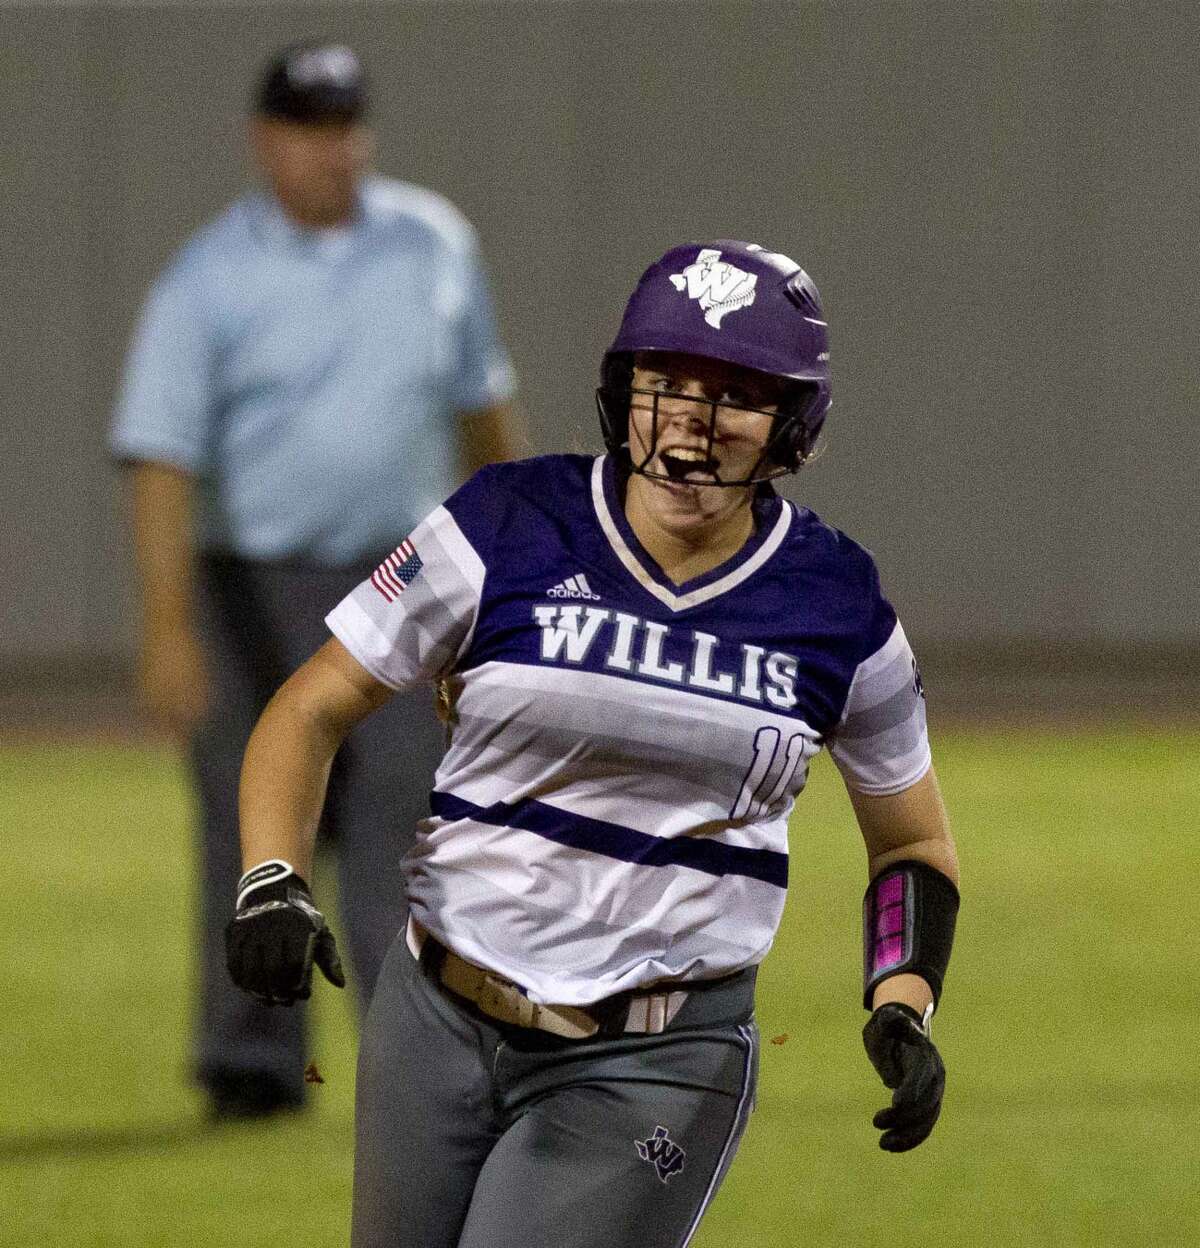 Rachel Brown #11 of Willis celebrates after her walk-off, two-run homer during the ninth inning in Game 3 of a Region III-5A final high school softball series at Cougar Softball Stadium, Saturday, May 27, 2017, in Houston. Wilis defeated Barbers Hill 5-3.